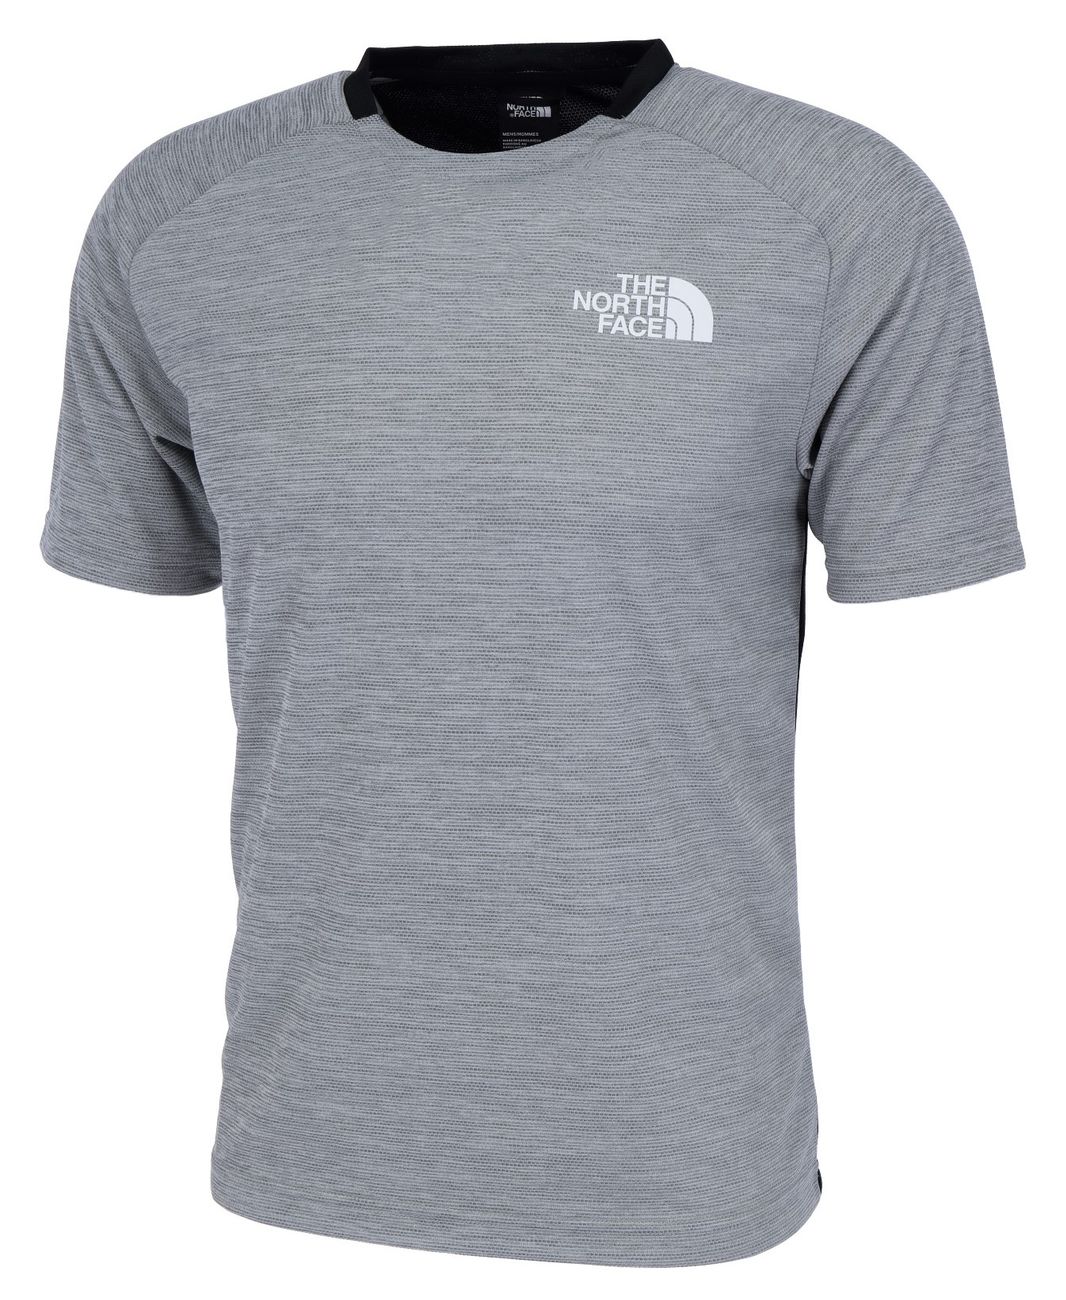 THE NORTH FACE M MOUNTAIN ATHLETICS TEE Herren T-Shirt - The North Face - SAGATOO - 193394987719